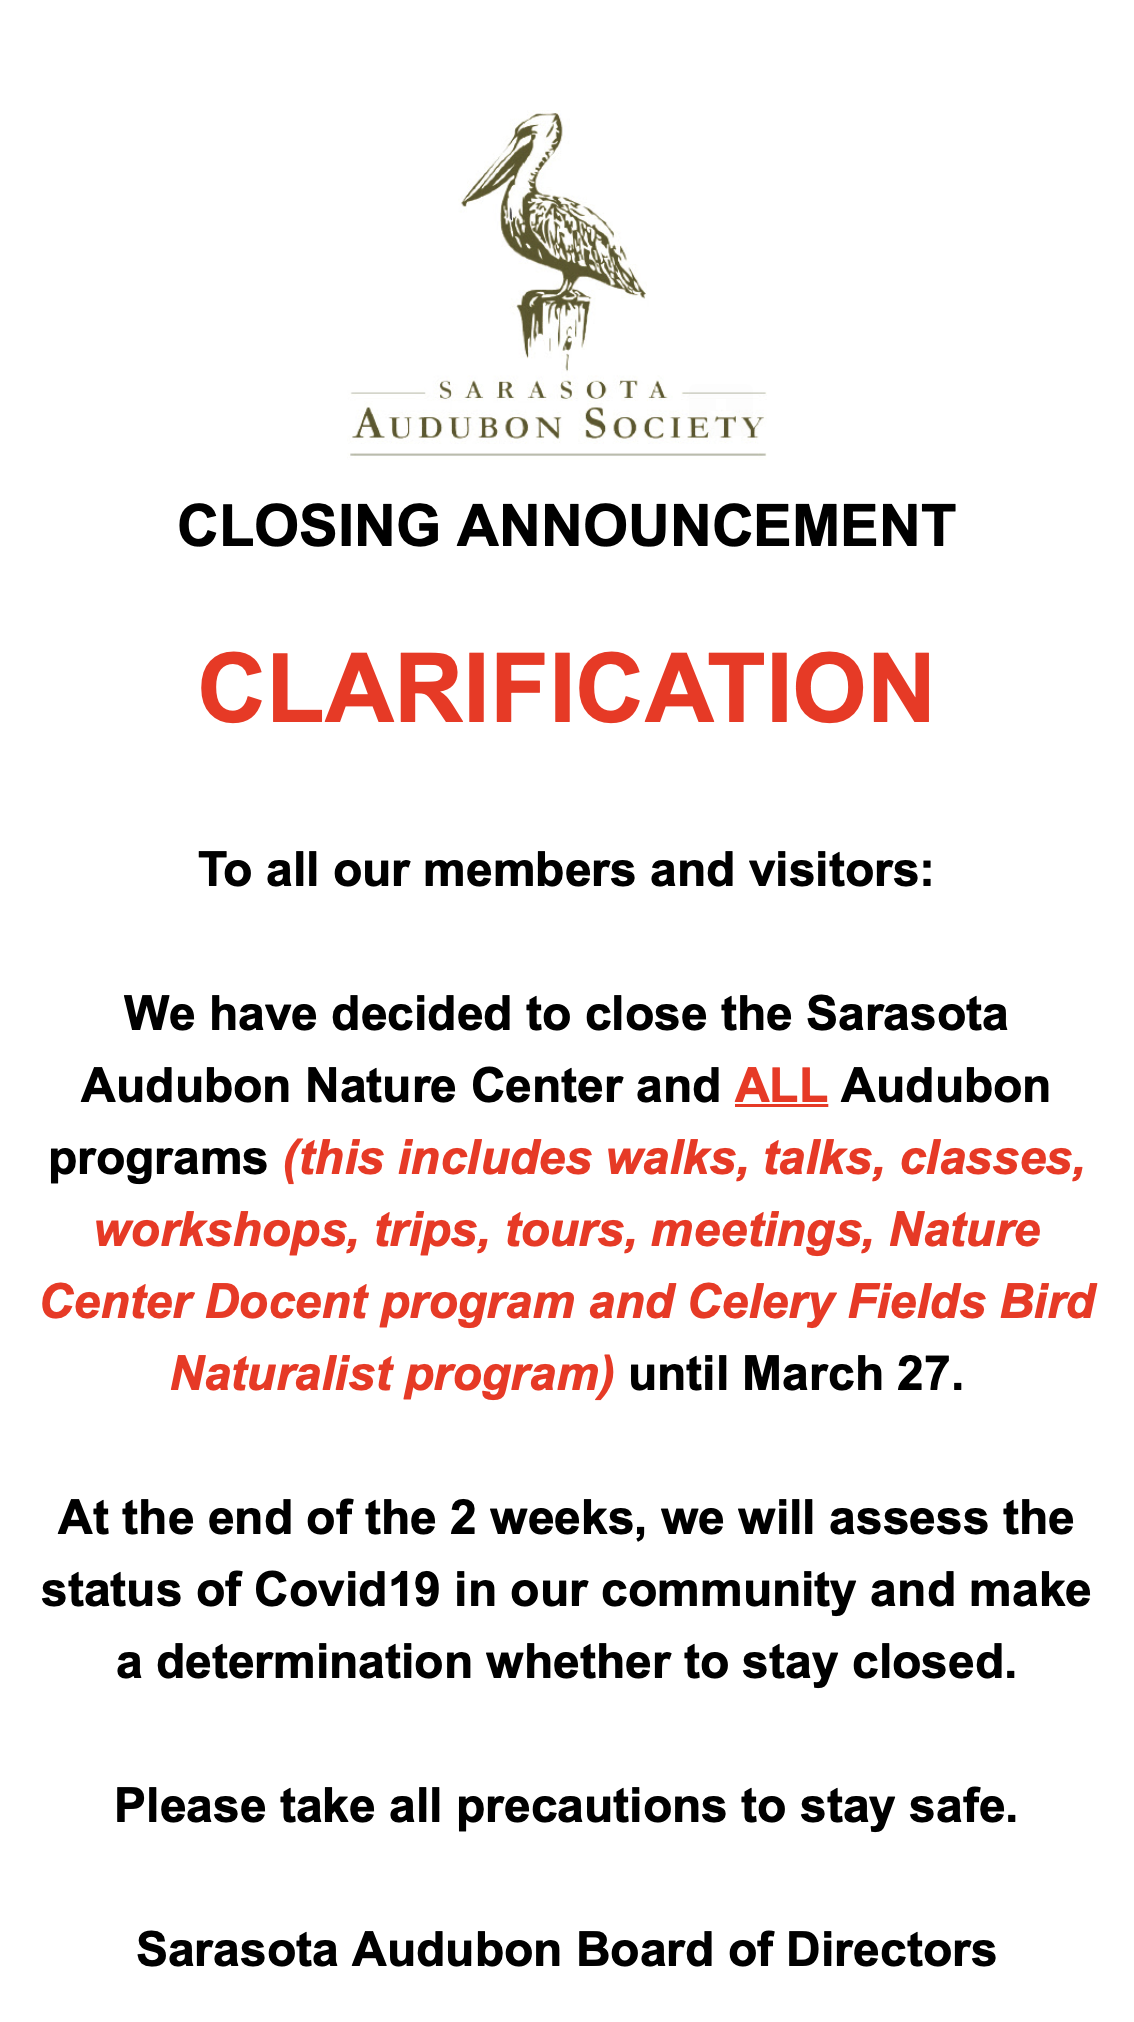 Announcement stating that the Audubon society will be closed through March 27th 2020